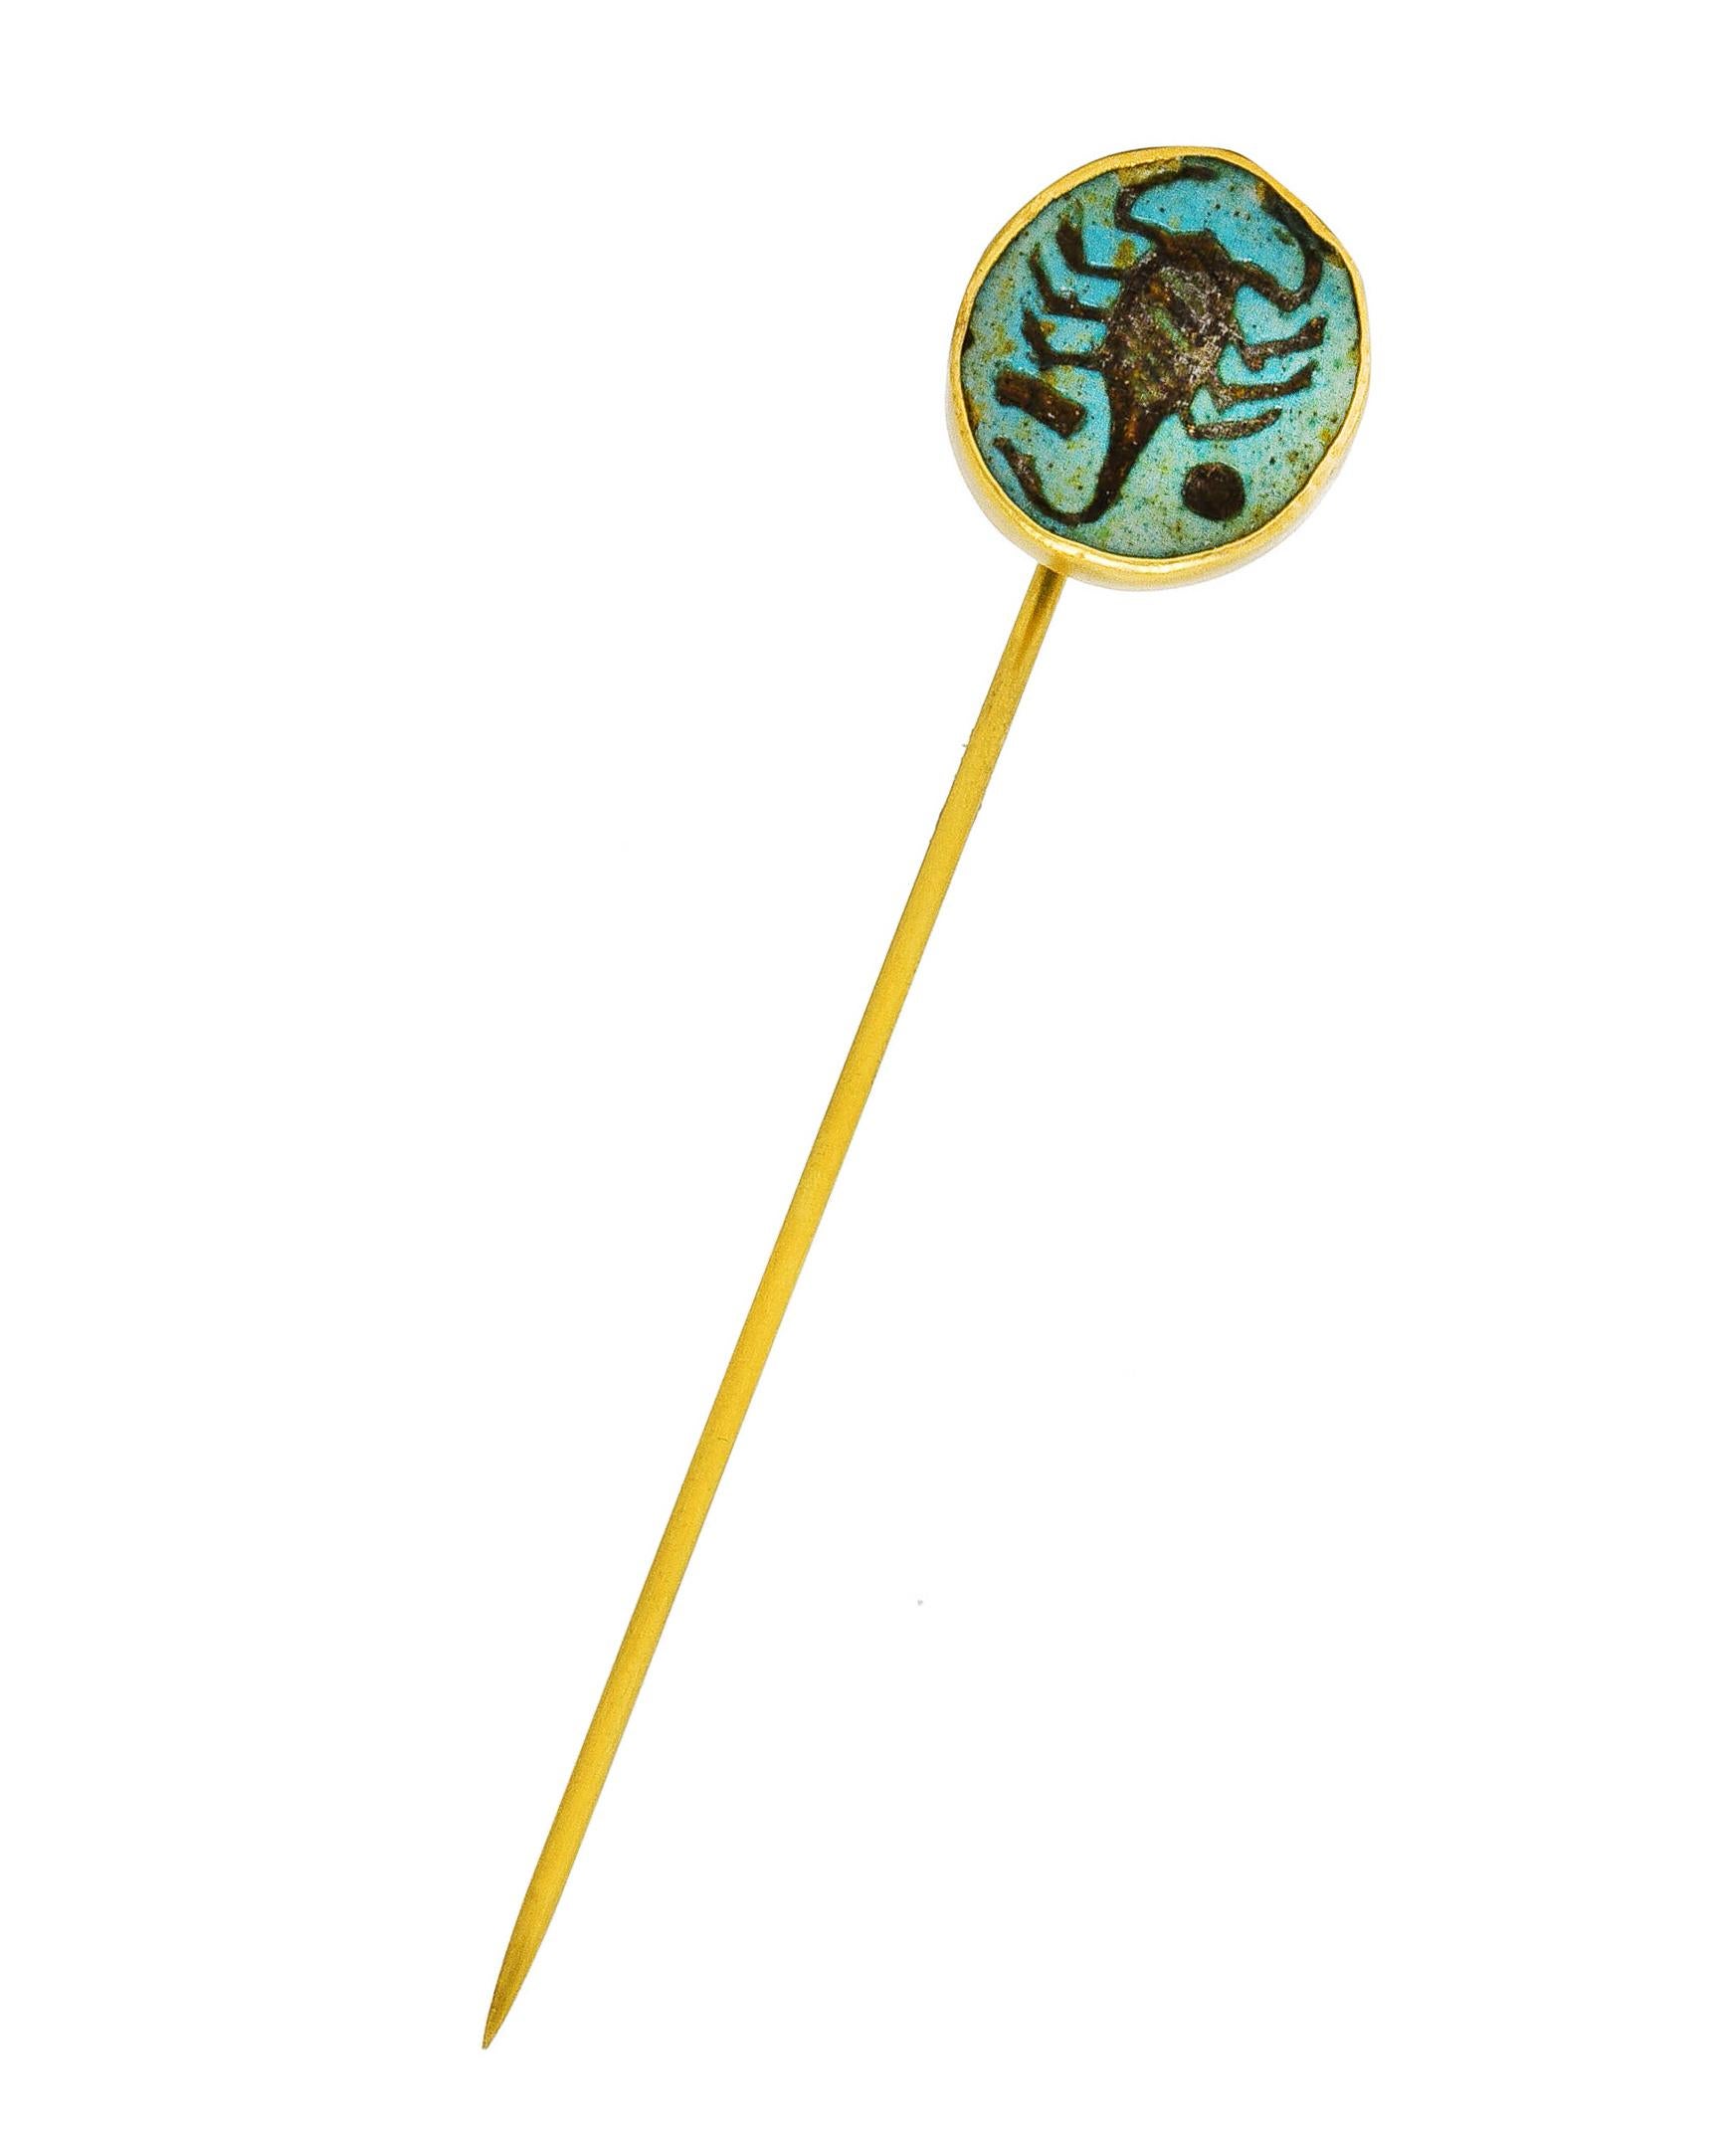 Centering an intaglio carved turquoise cabochon measuring approximately 13.0 mm in diameter. Opaque greenish-blue with brownish matrix - depicting a scorpion with geometric symbols. Bezel set in a grooved swirling bezel cup. Completed by stick pin.